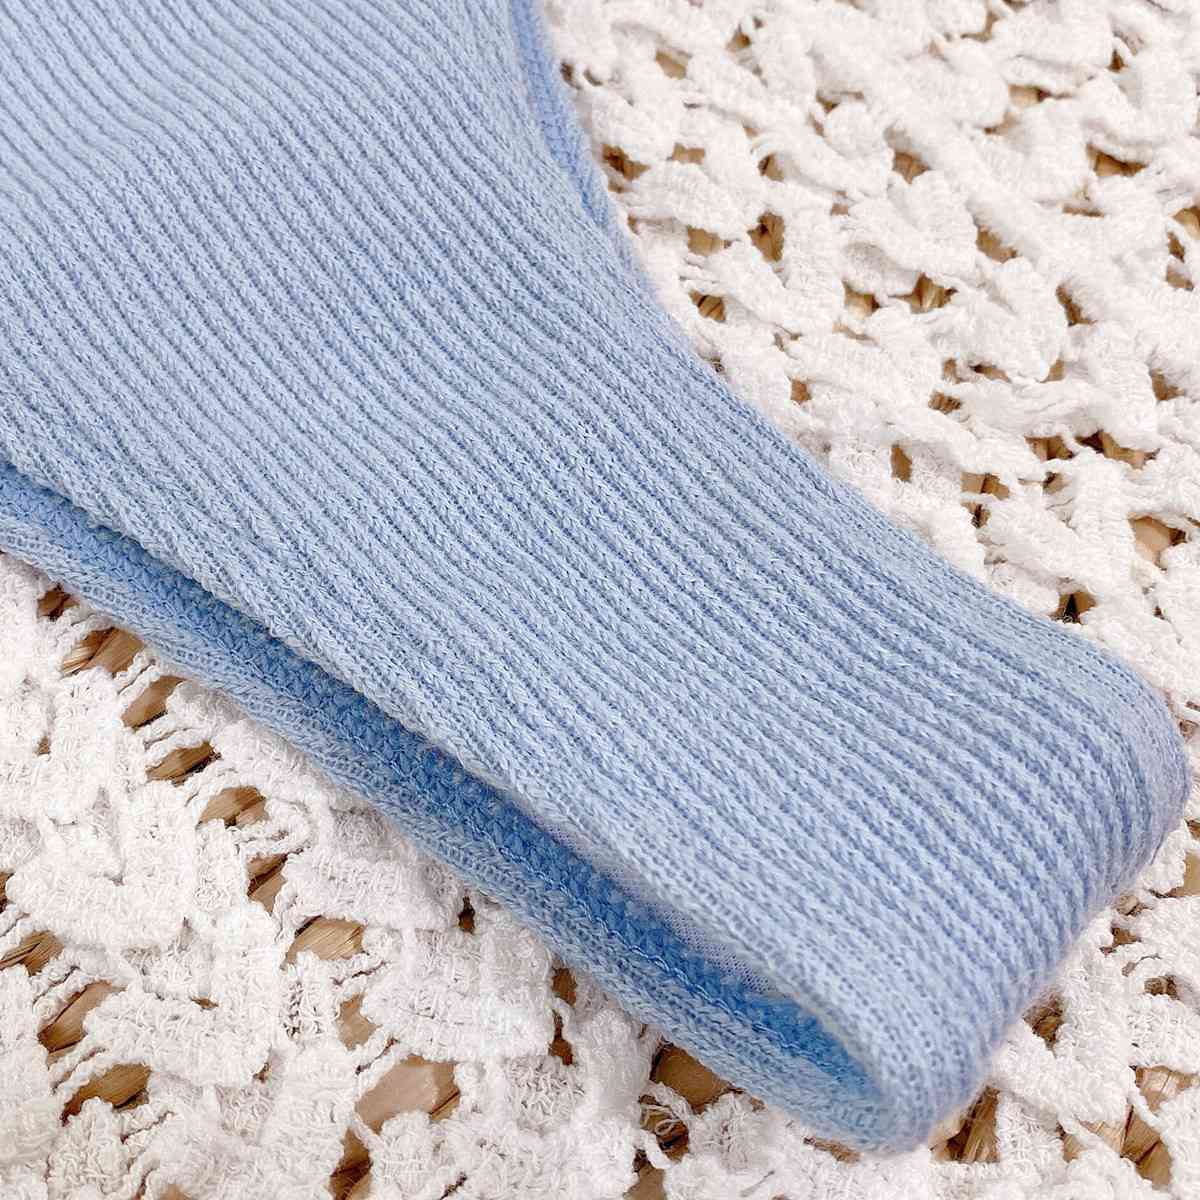 a blue sweater laying on top of a white doily